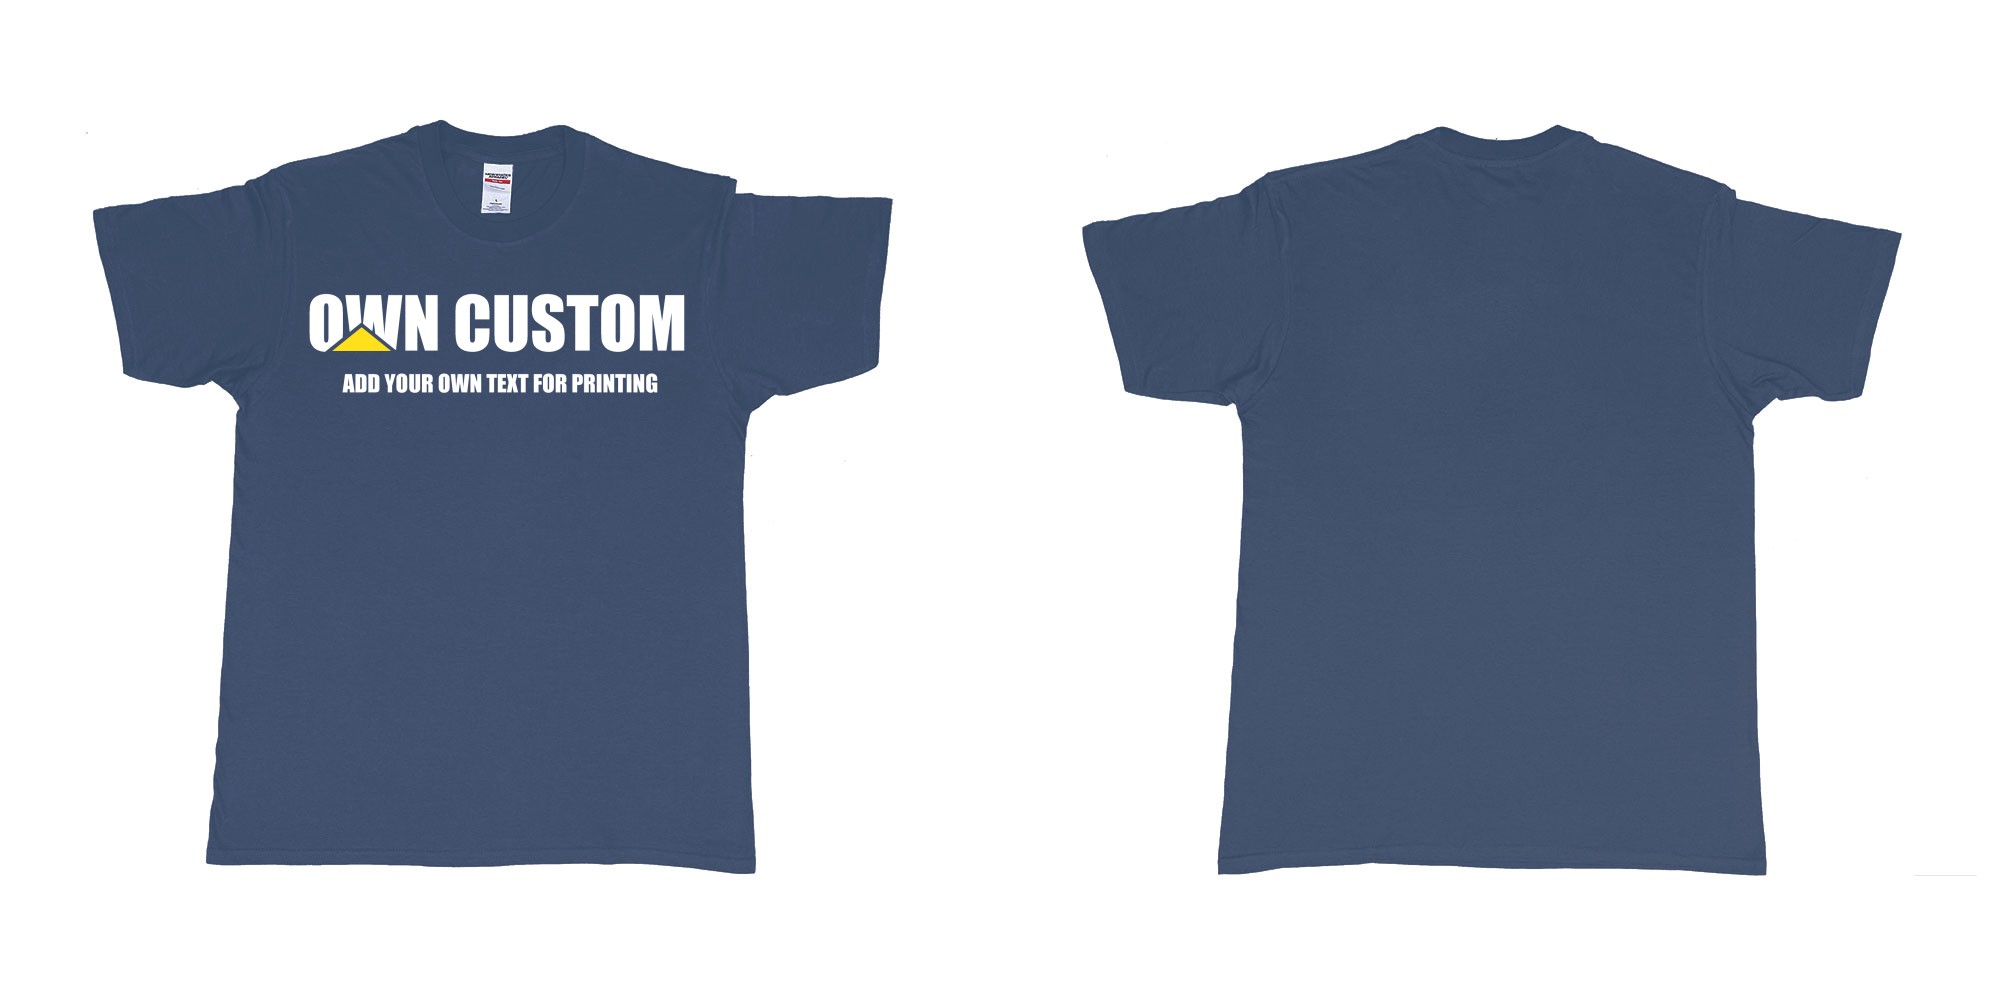 Custom tshirt design caterpillar inc logo custom text printing shirt in fabric color navy choice your own text made in Bali by The Pirate Way